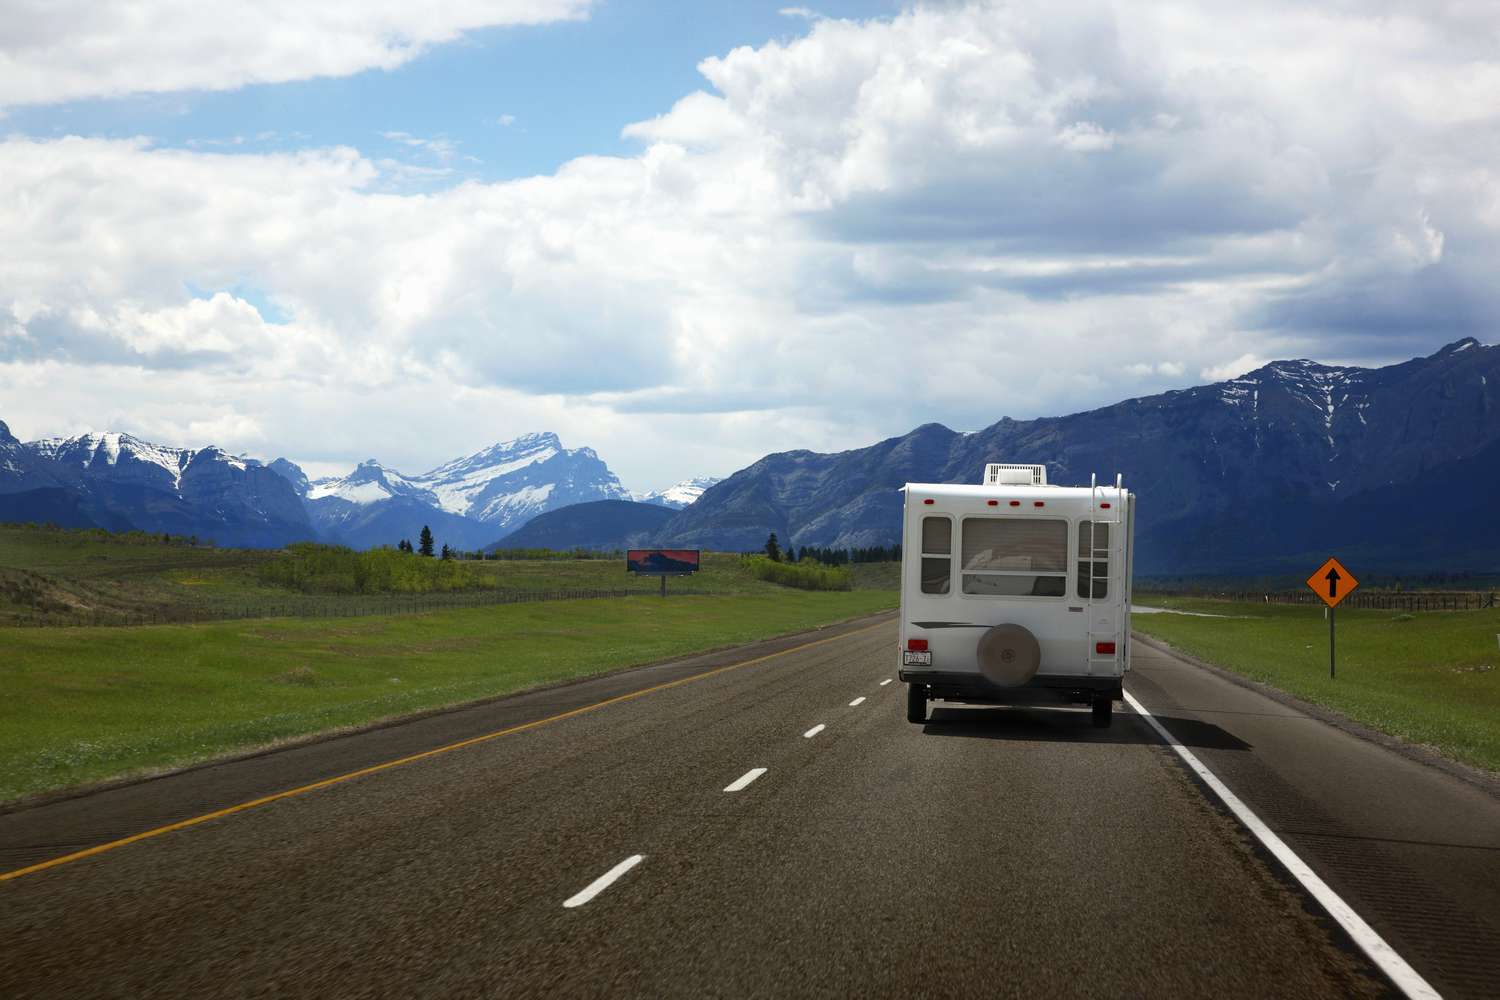 A picture of a travel trailer on an open highway with snow capped mountains in the background.